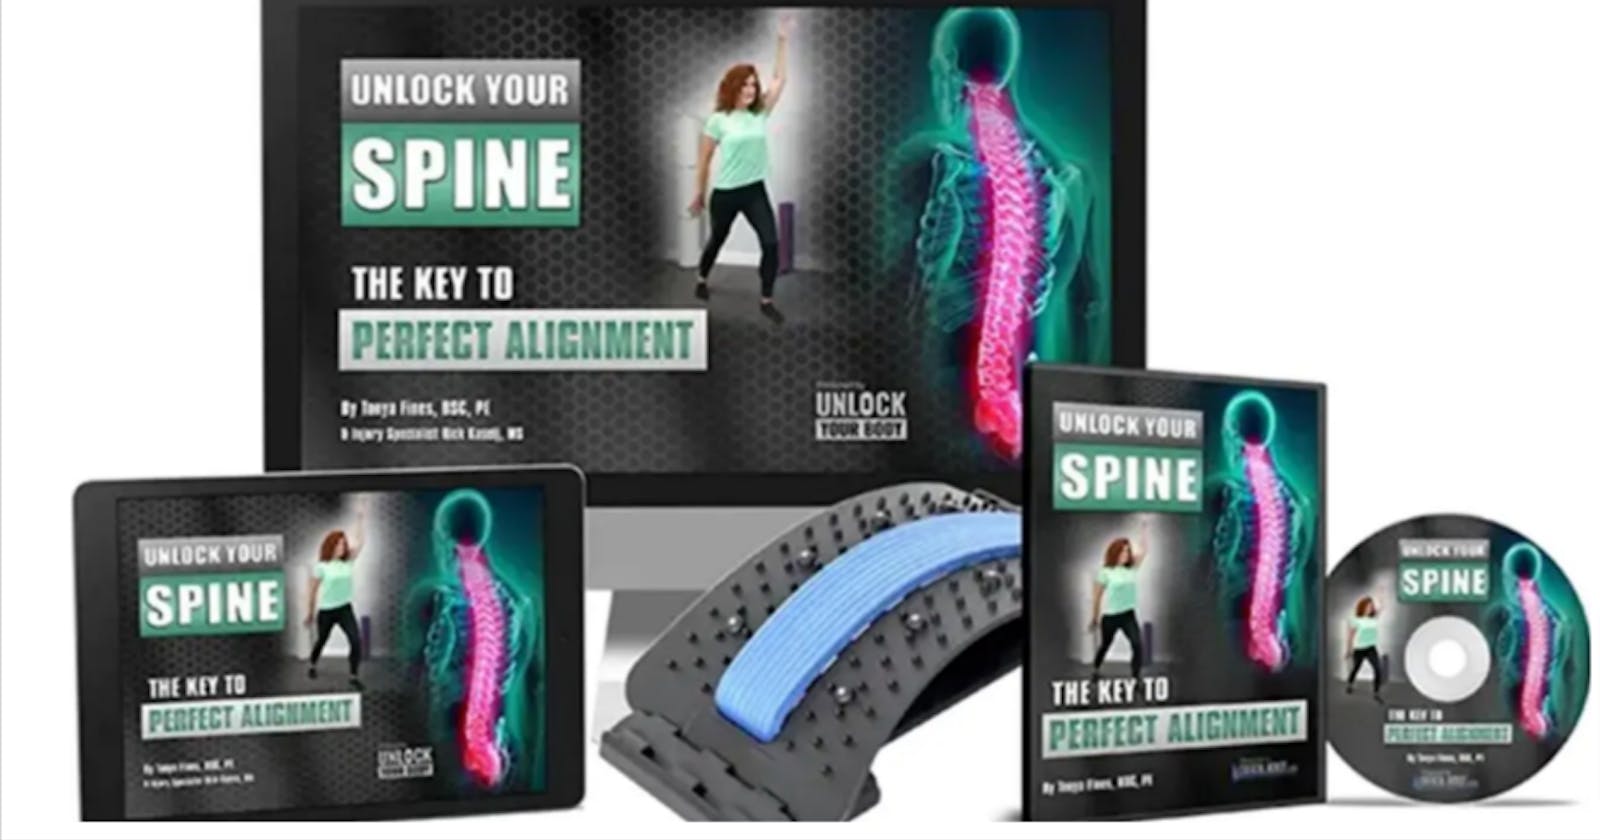 Unlock Your Spine Reviews - All You Need To Know